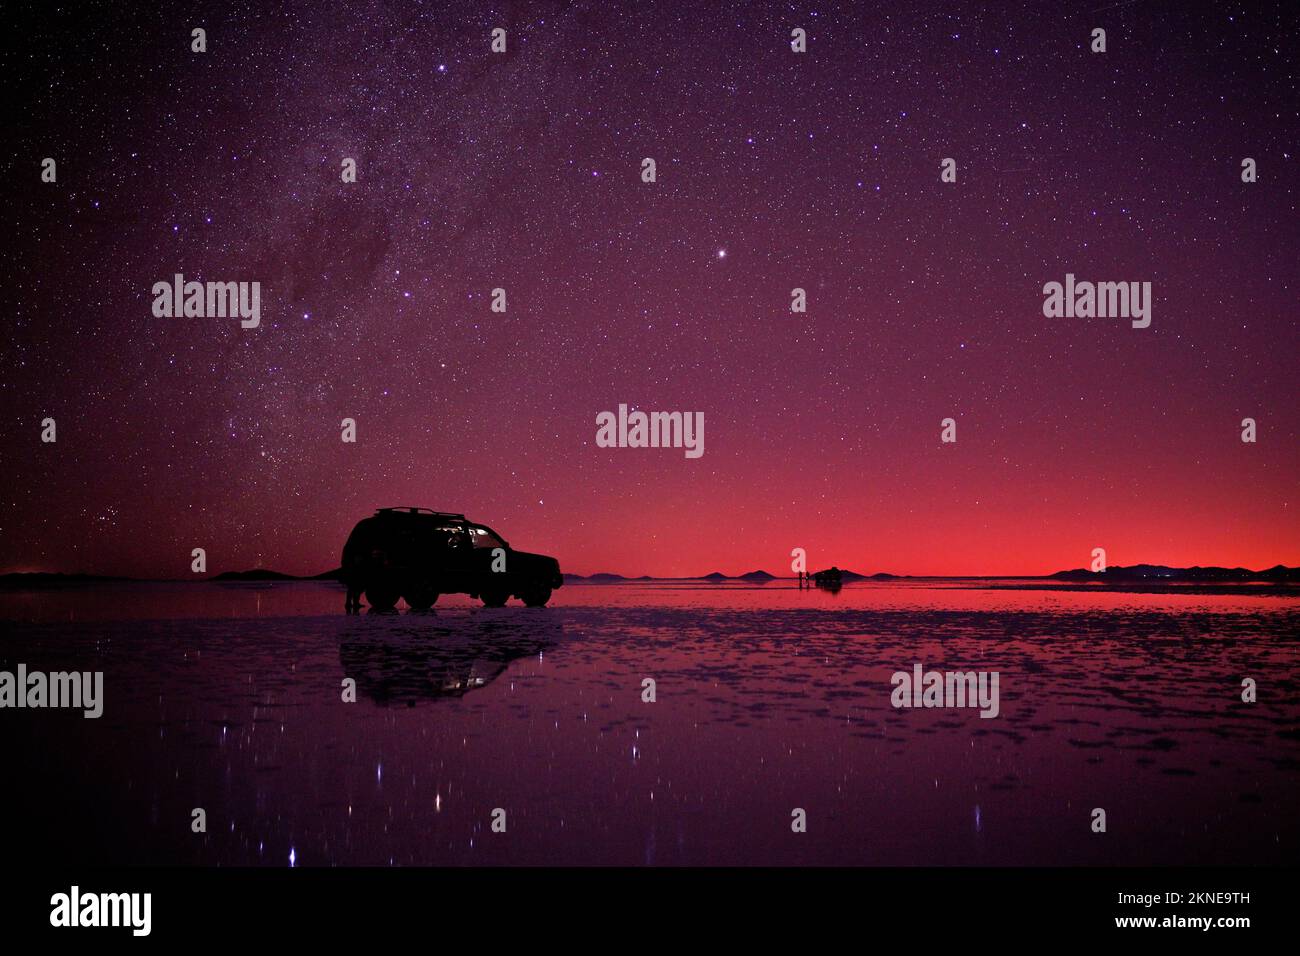 Night star sky at Uyuni salt flats, Bolivia, with a offroad-car parking on the surface. Stock Photo